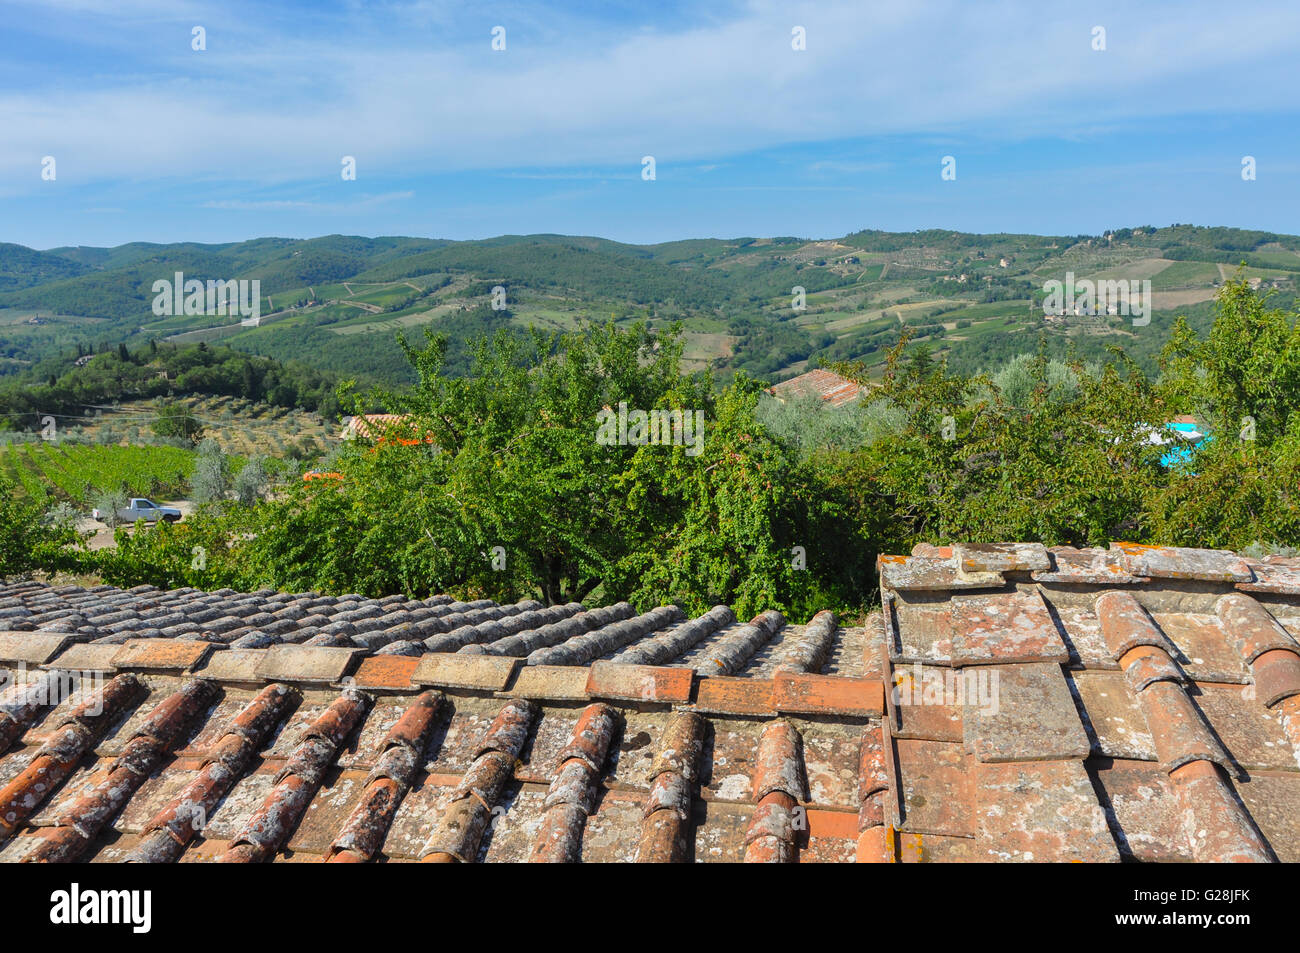 view of Chianti Region in central Italy from a old terra cotta roof Stock Photo